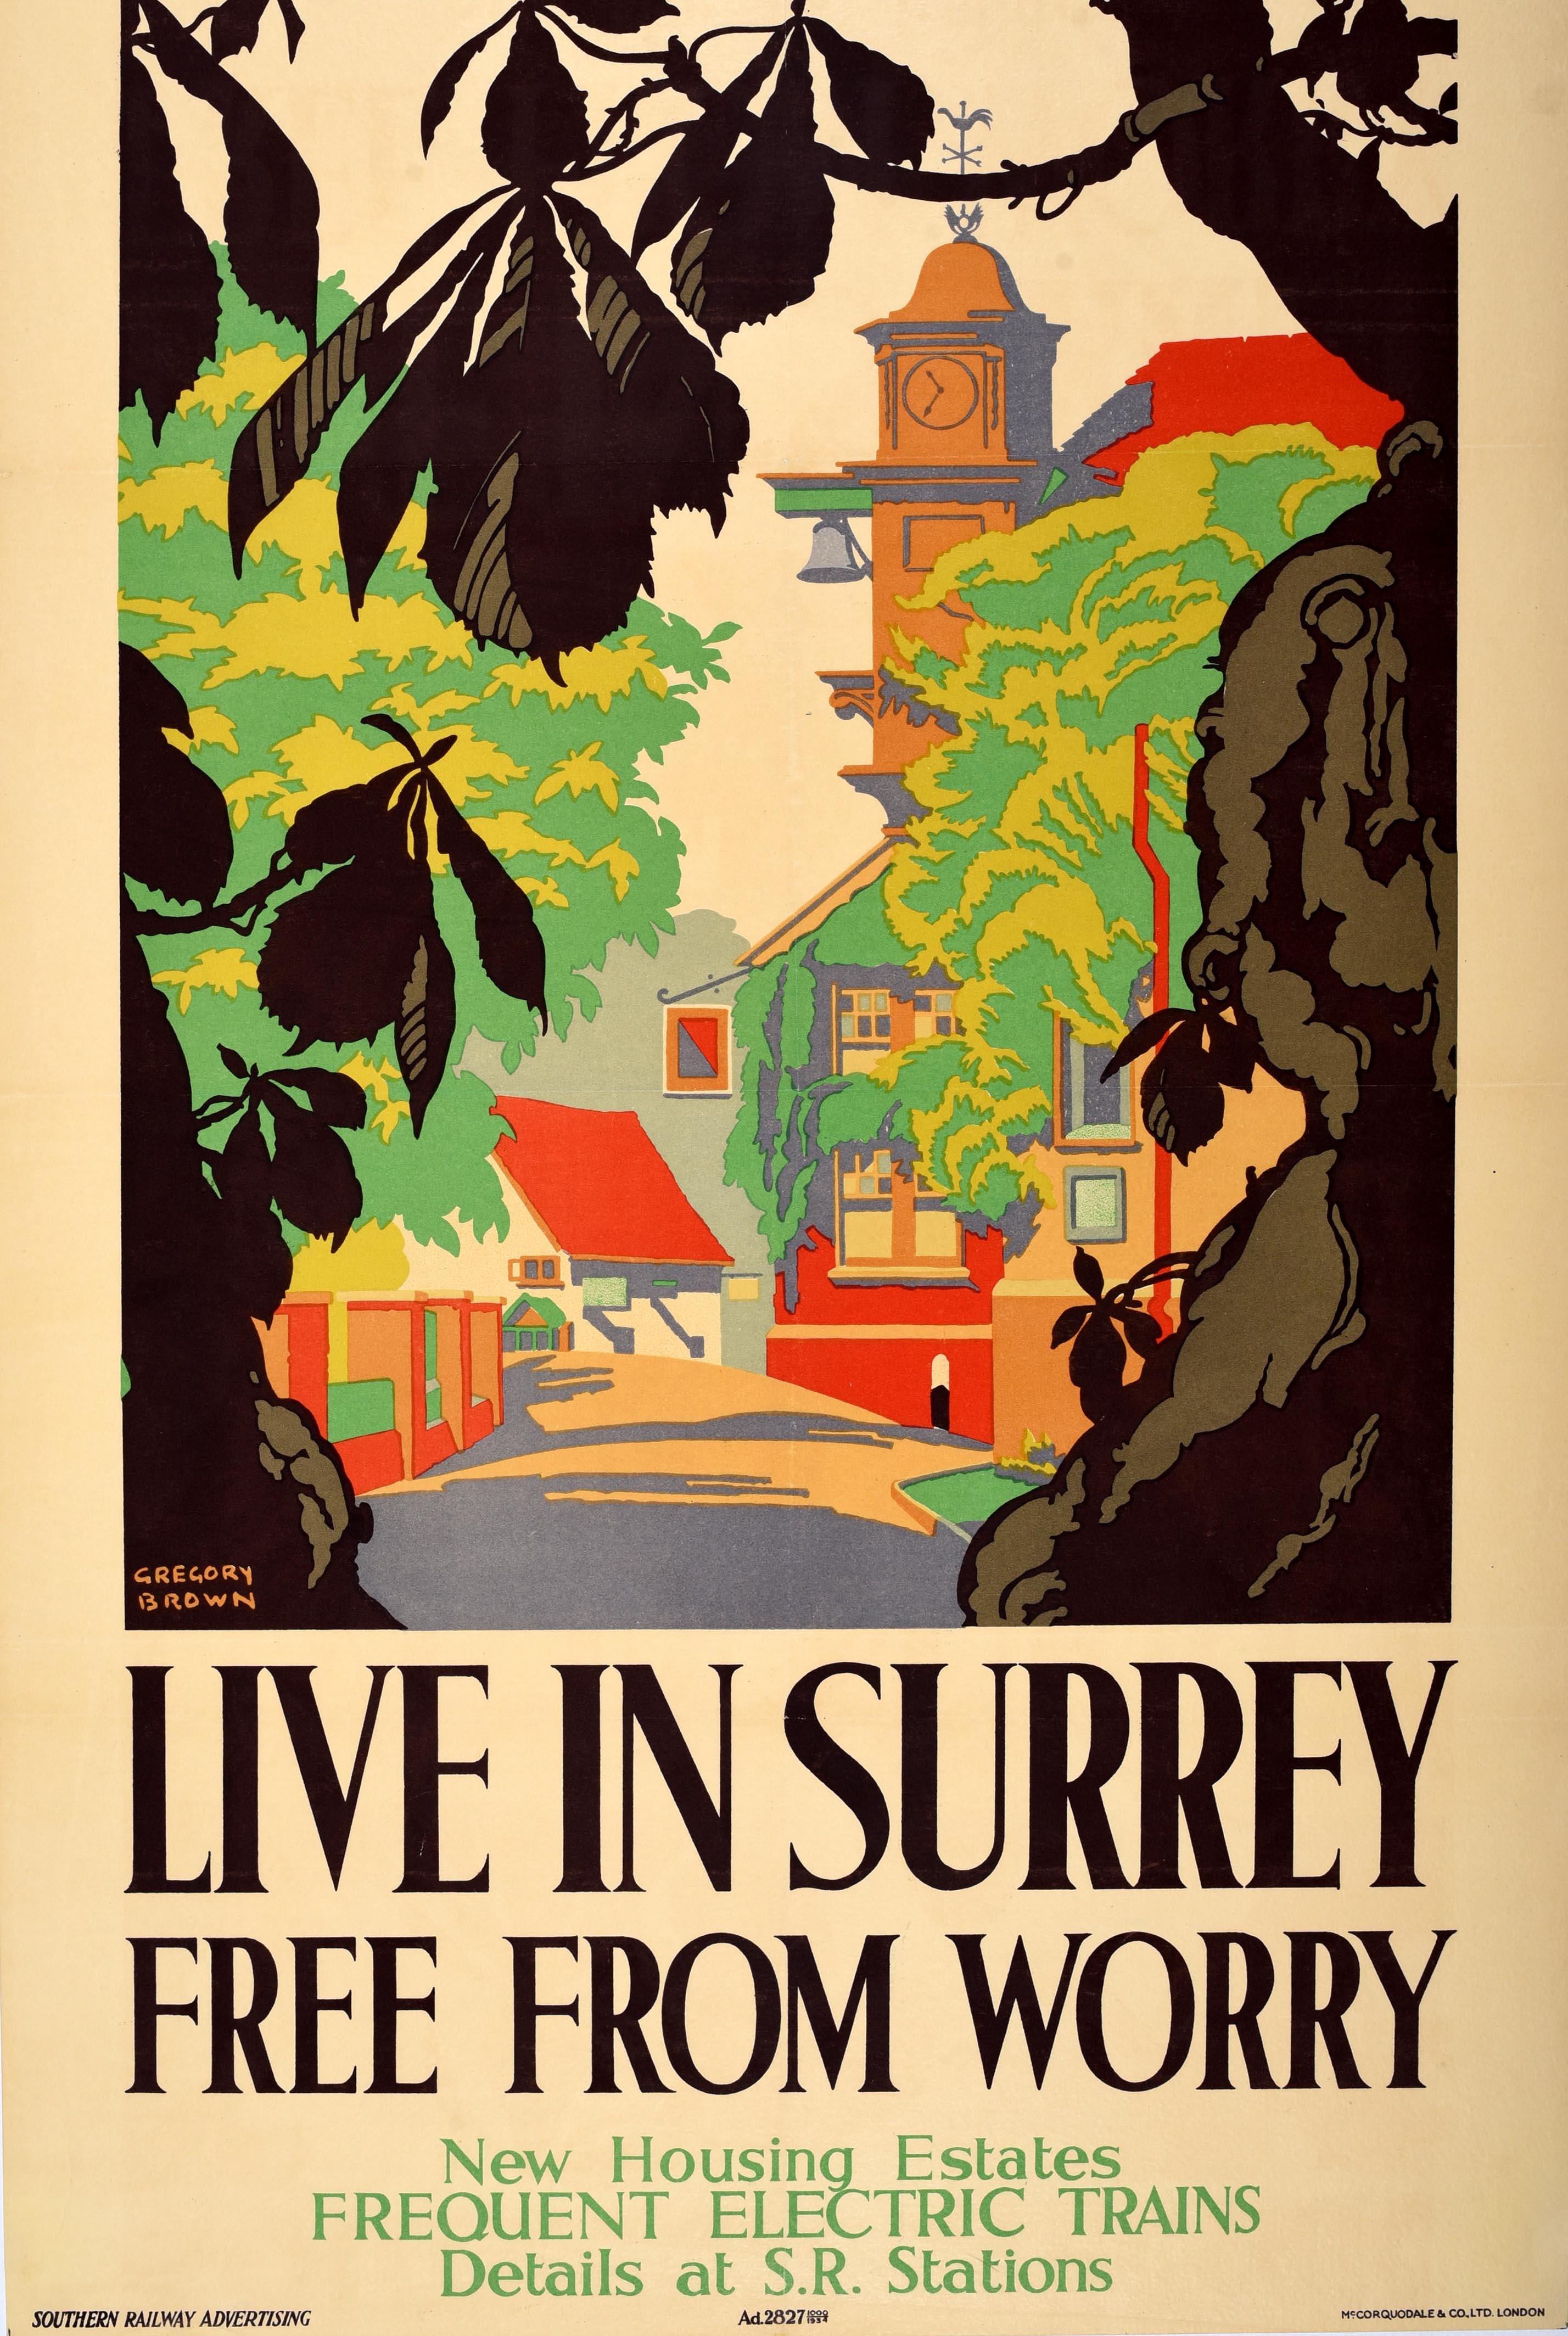 Original vintage travel advertising poster - Southern Electric Live In Surrey Free From Worry New housing estates Frequent electric trains Details SR stations - featuring colourful artwork by the artist, metal worker and designer Gregory Brown